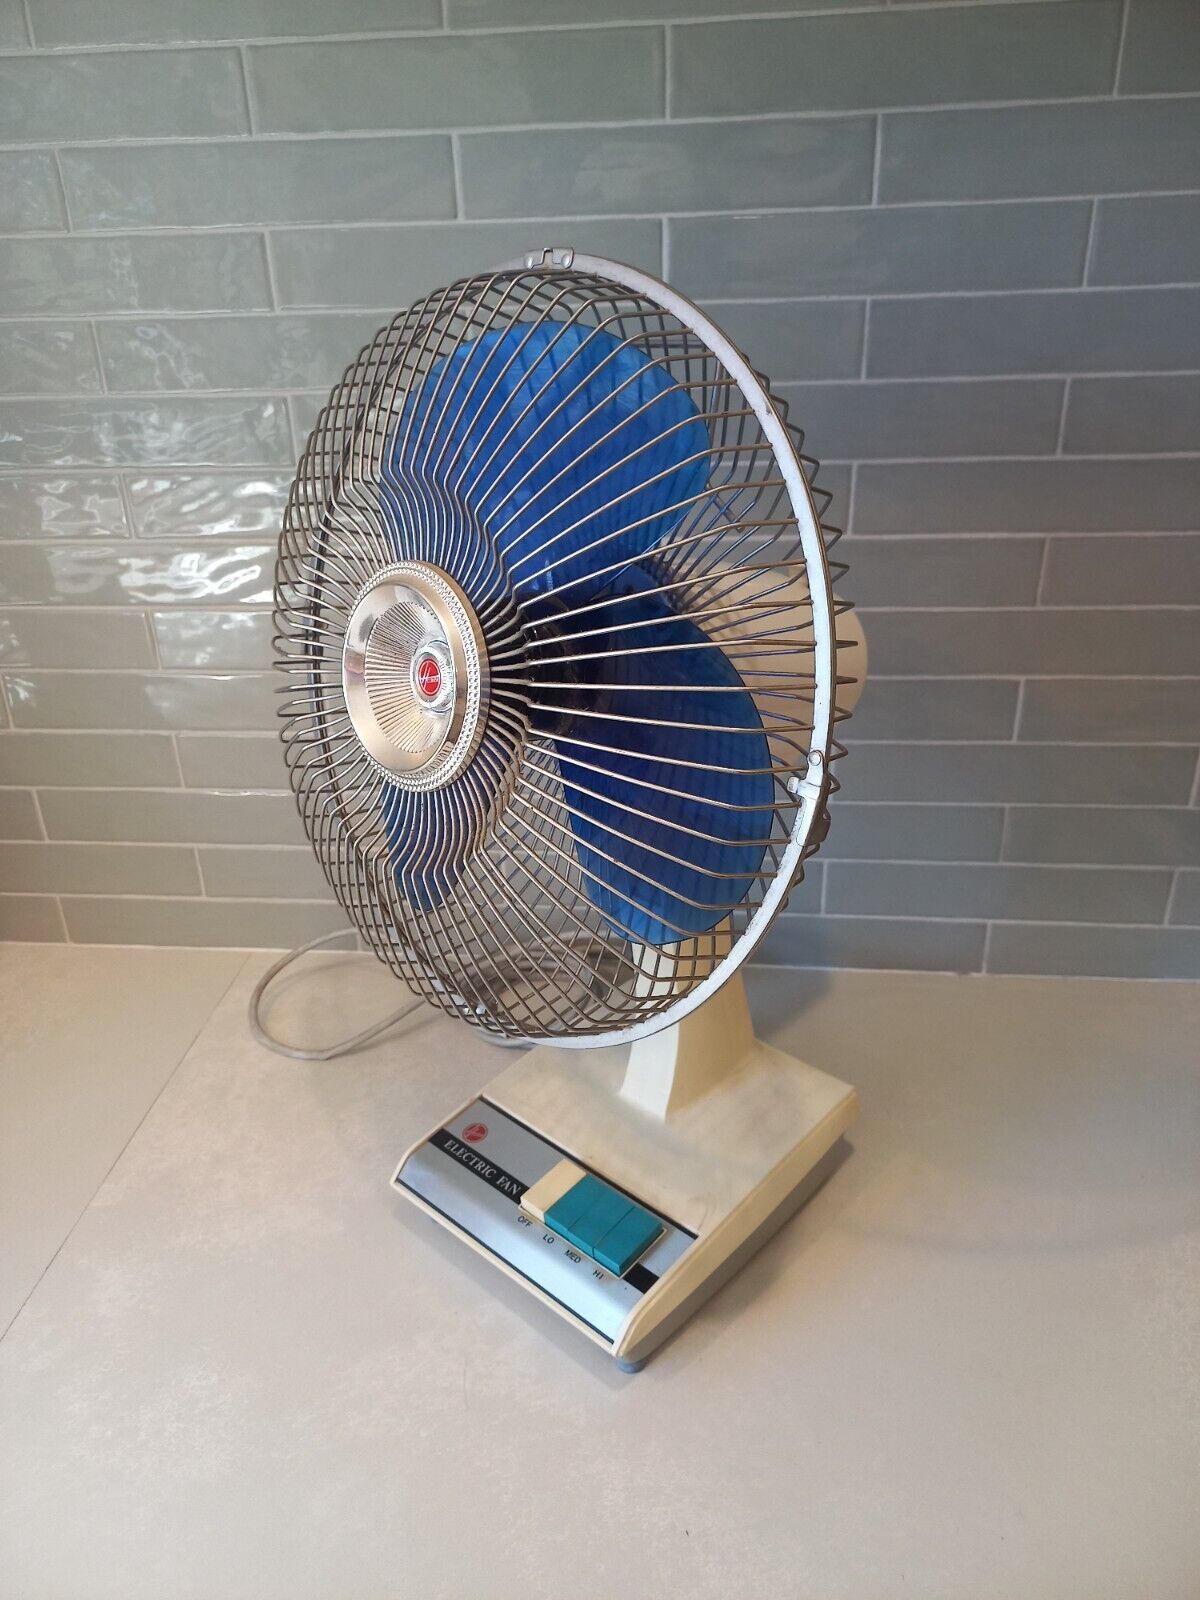 Vintage Retro Hoover Oscillating Electric Fan Blue & White 70s 80s Tested Works